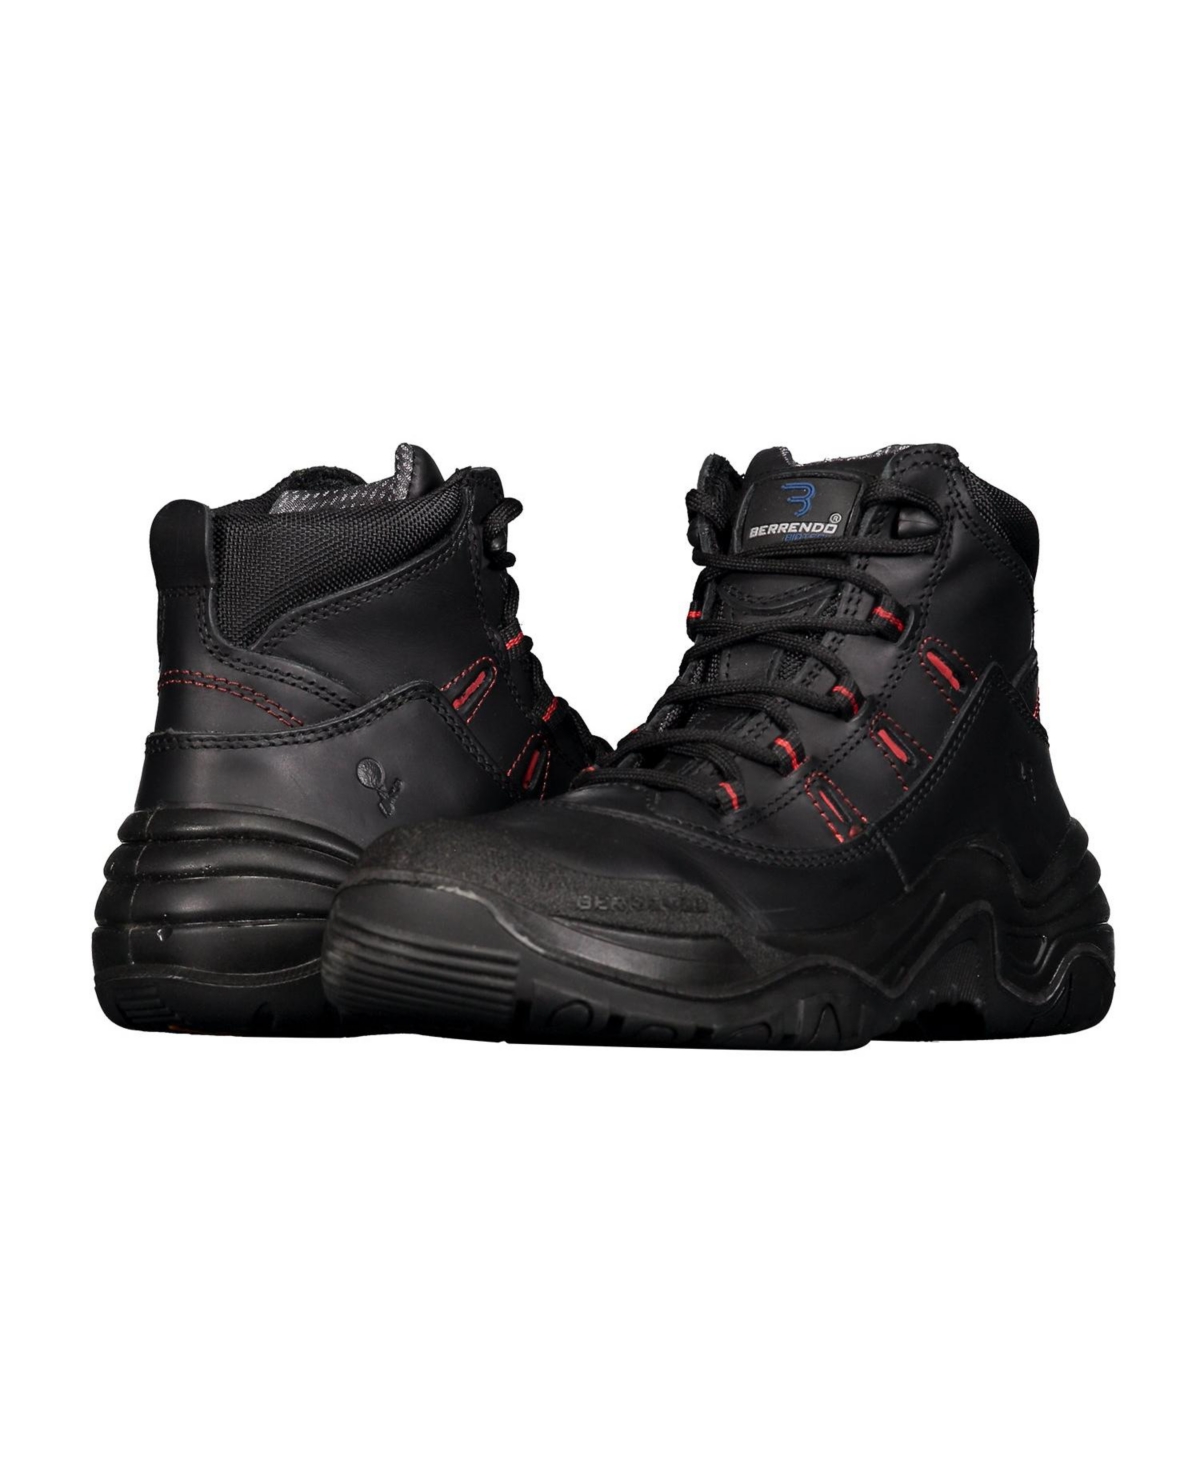 Men's Steel Toe Work Boots 6" - Oil and Slip Resistant - Eh Rated - Black